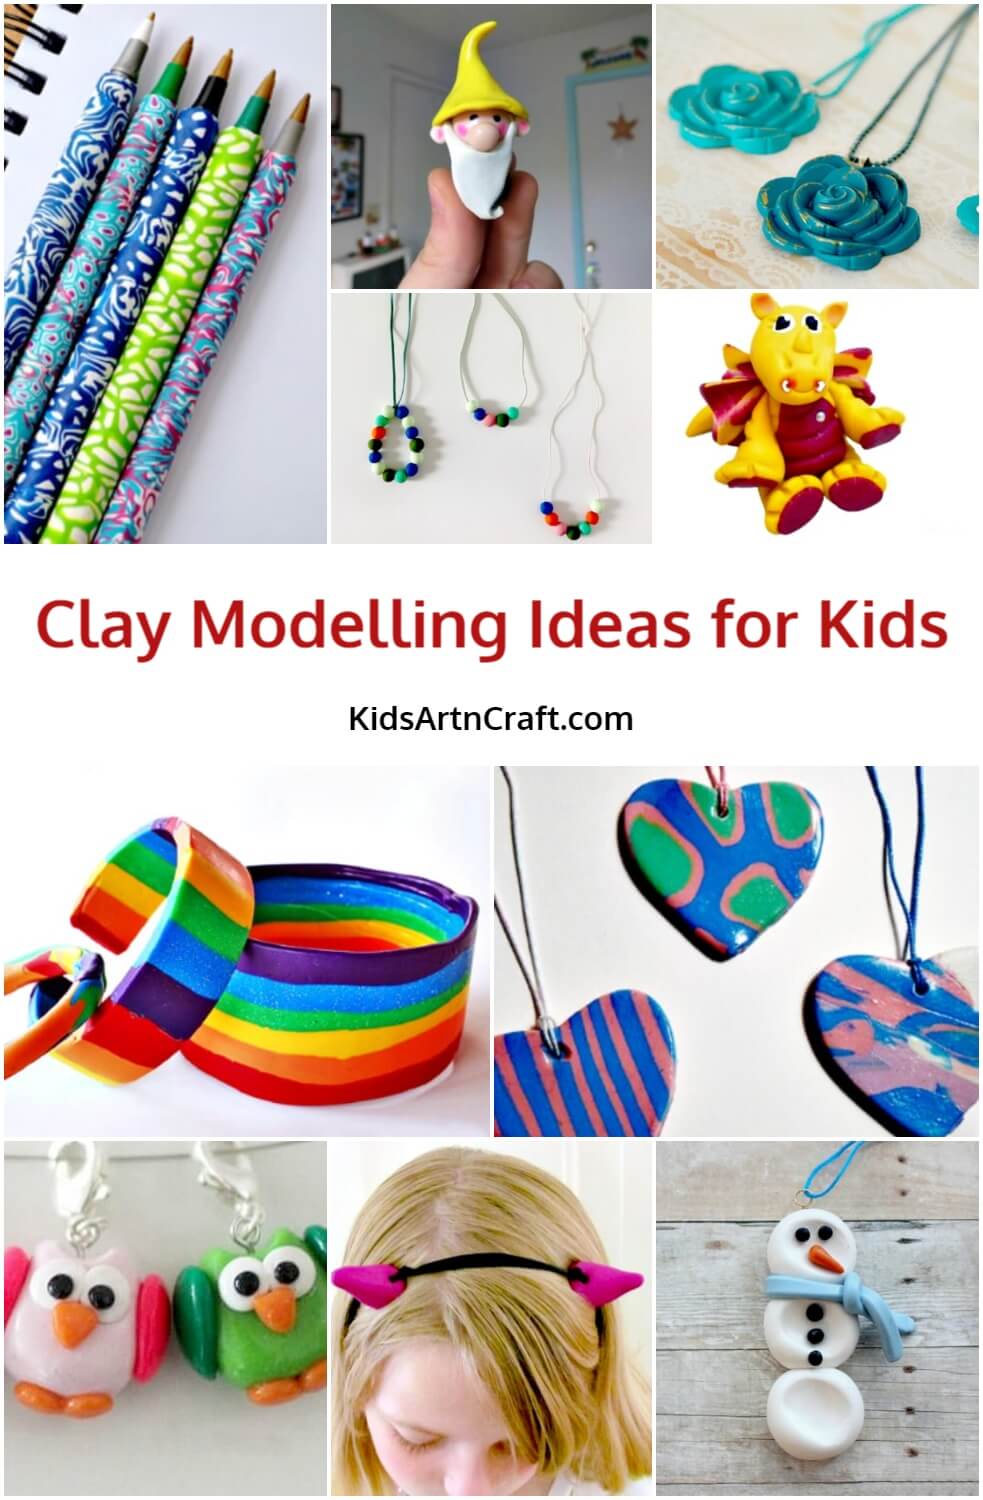 Clay Modelling Ideas for Kids